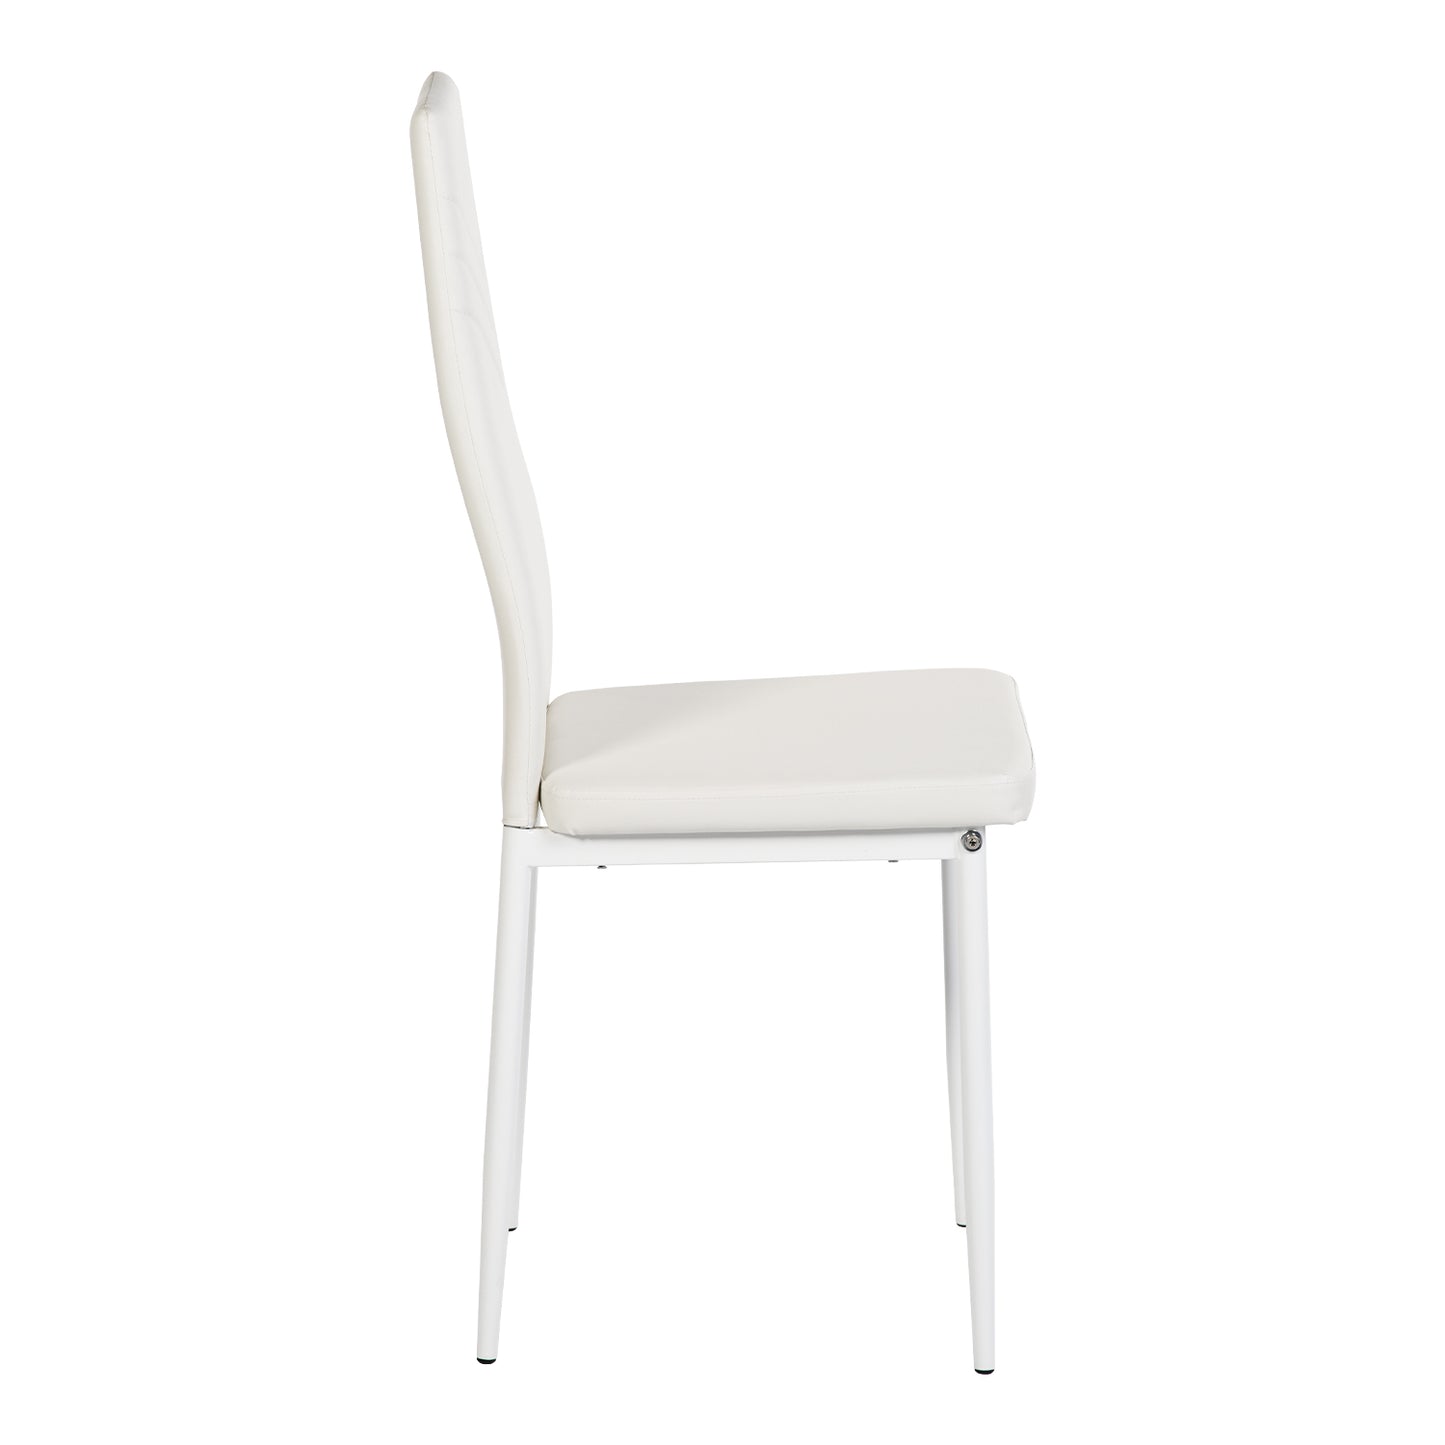 ANN-V Upholstered Dining Chair with Iron Legs - White